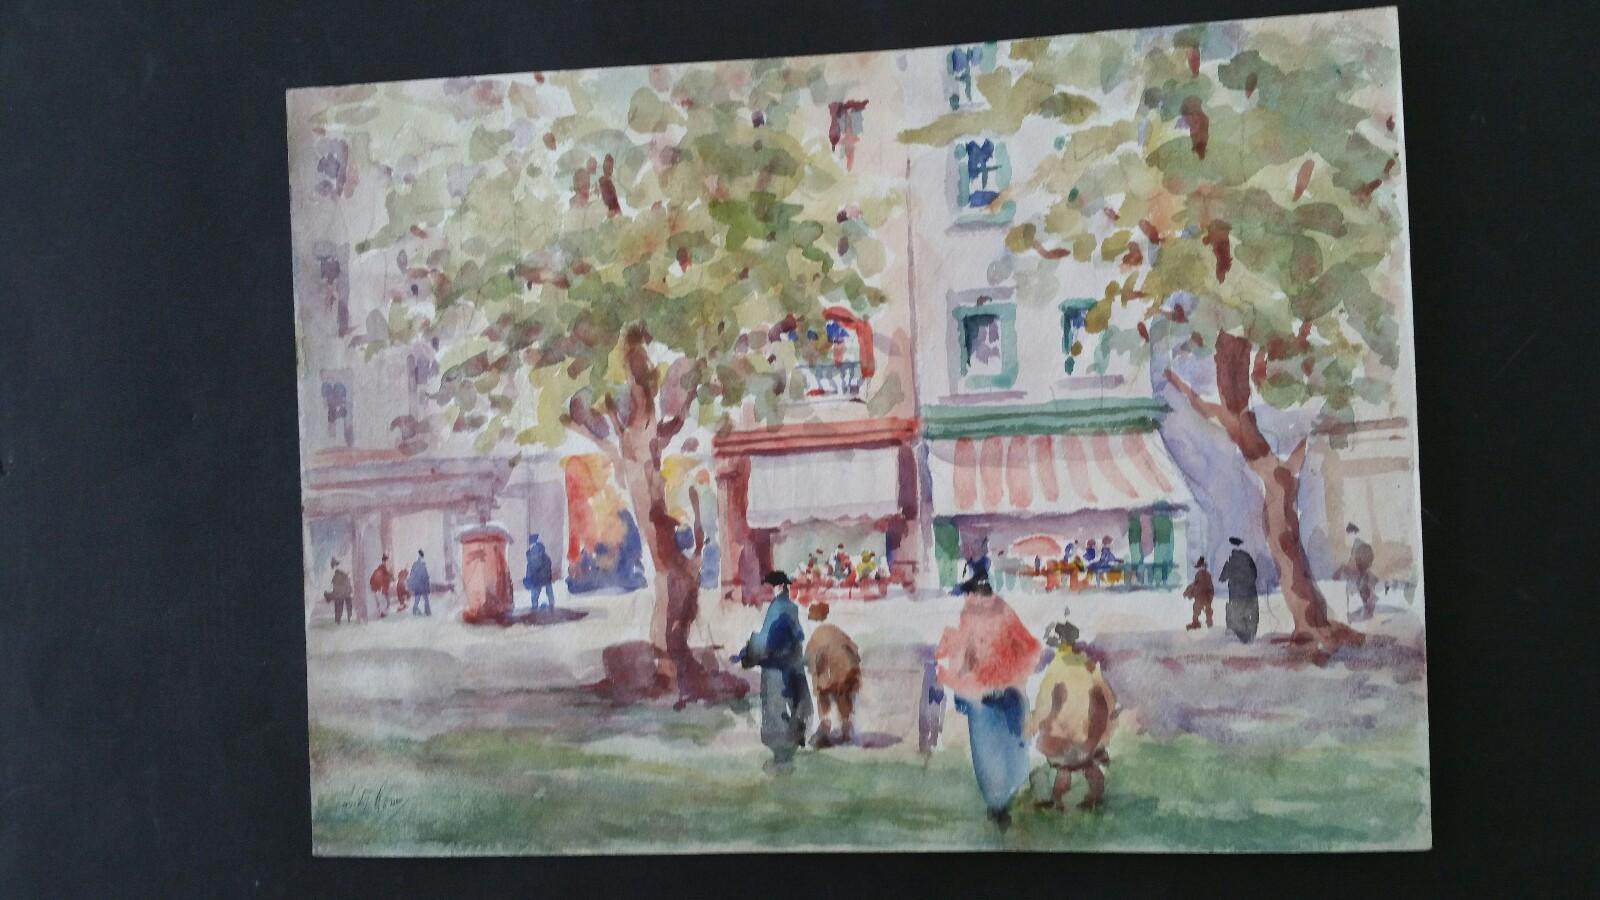 Belgium. An Afternoon in Antwerp
by Leonard Machin Rowe (1880-1968)
signed front lower left corner, inscribed and signed to the back
watercolour painting on artist's paper, unframed

sheet 9.75 x 13.75 inches

Bright painting by Leon. Rowe,